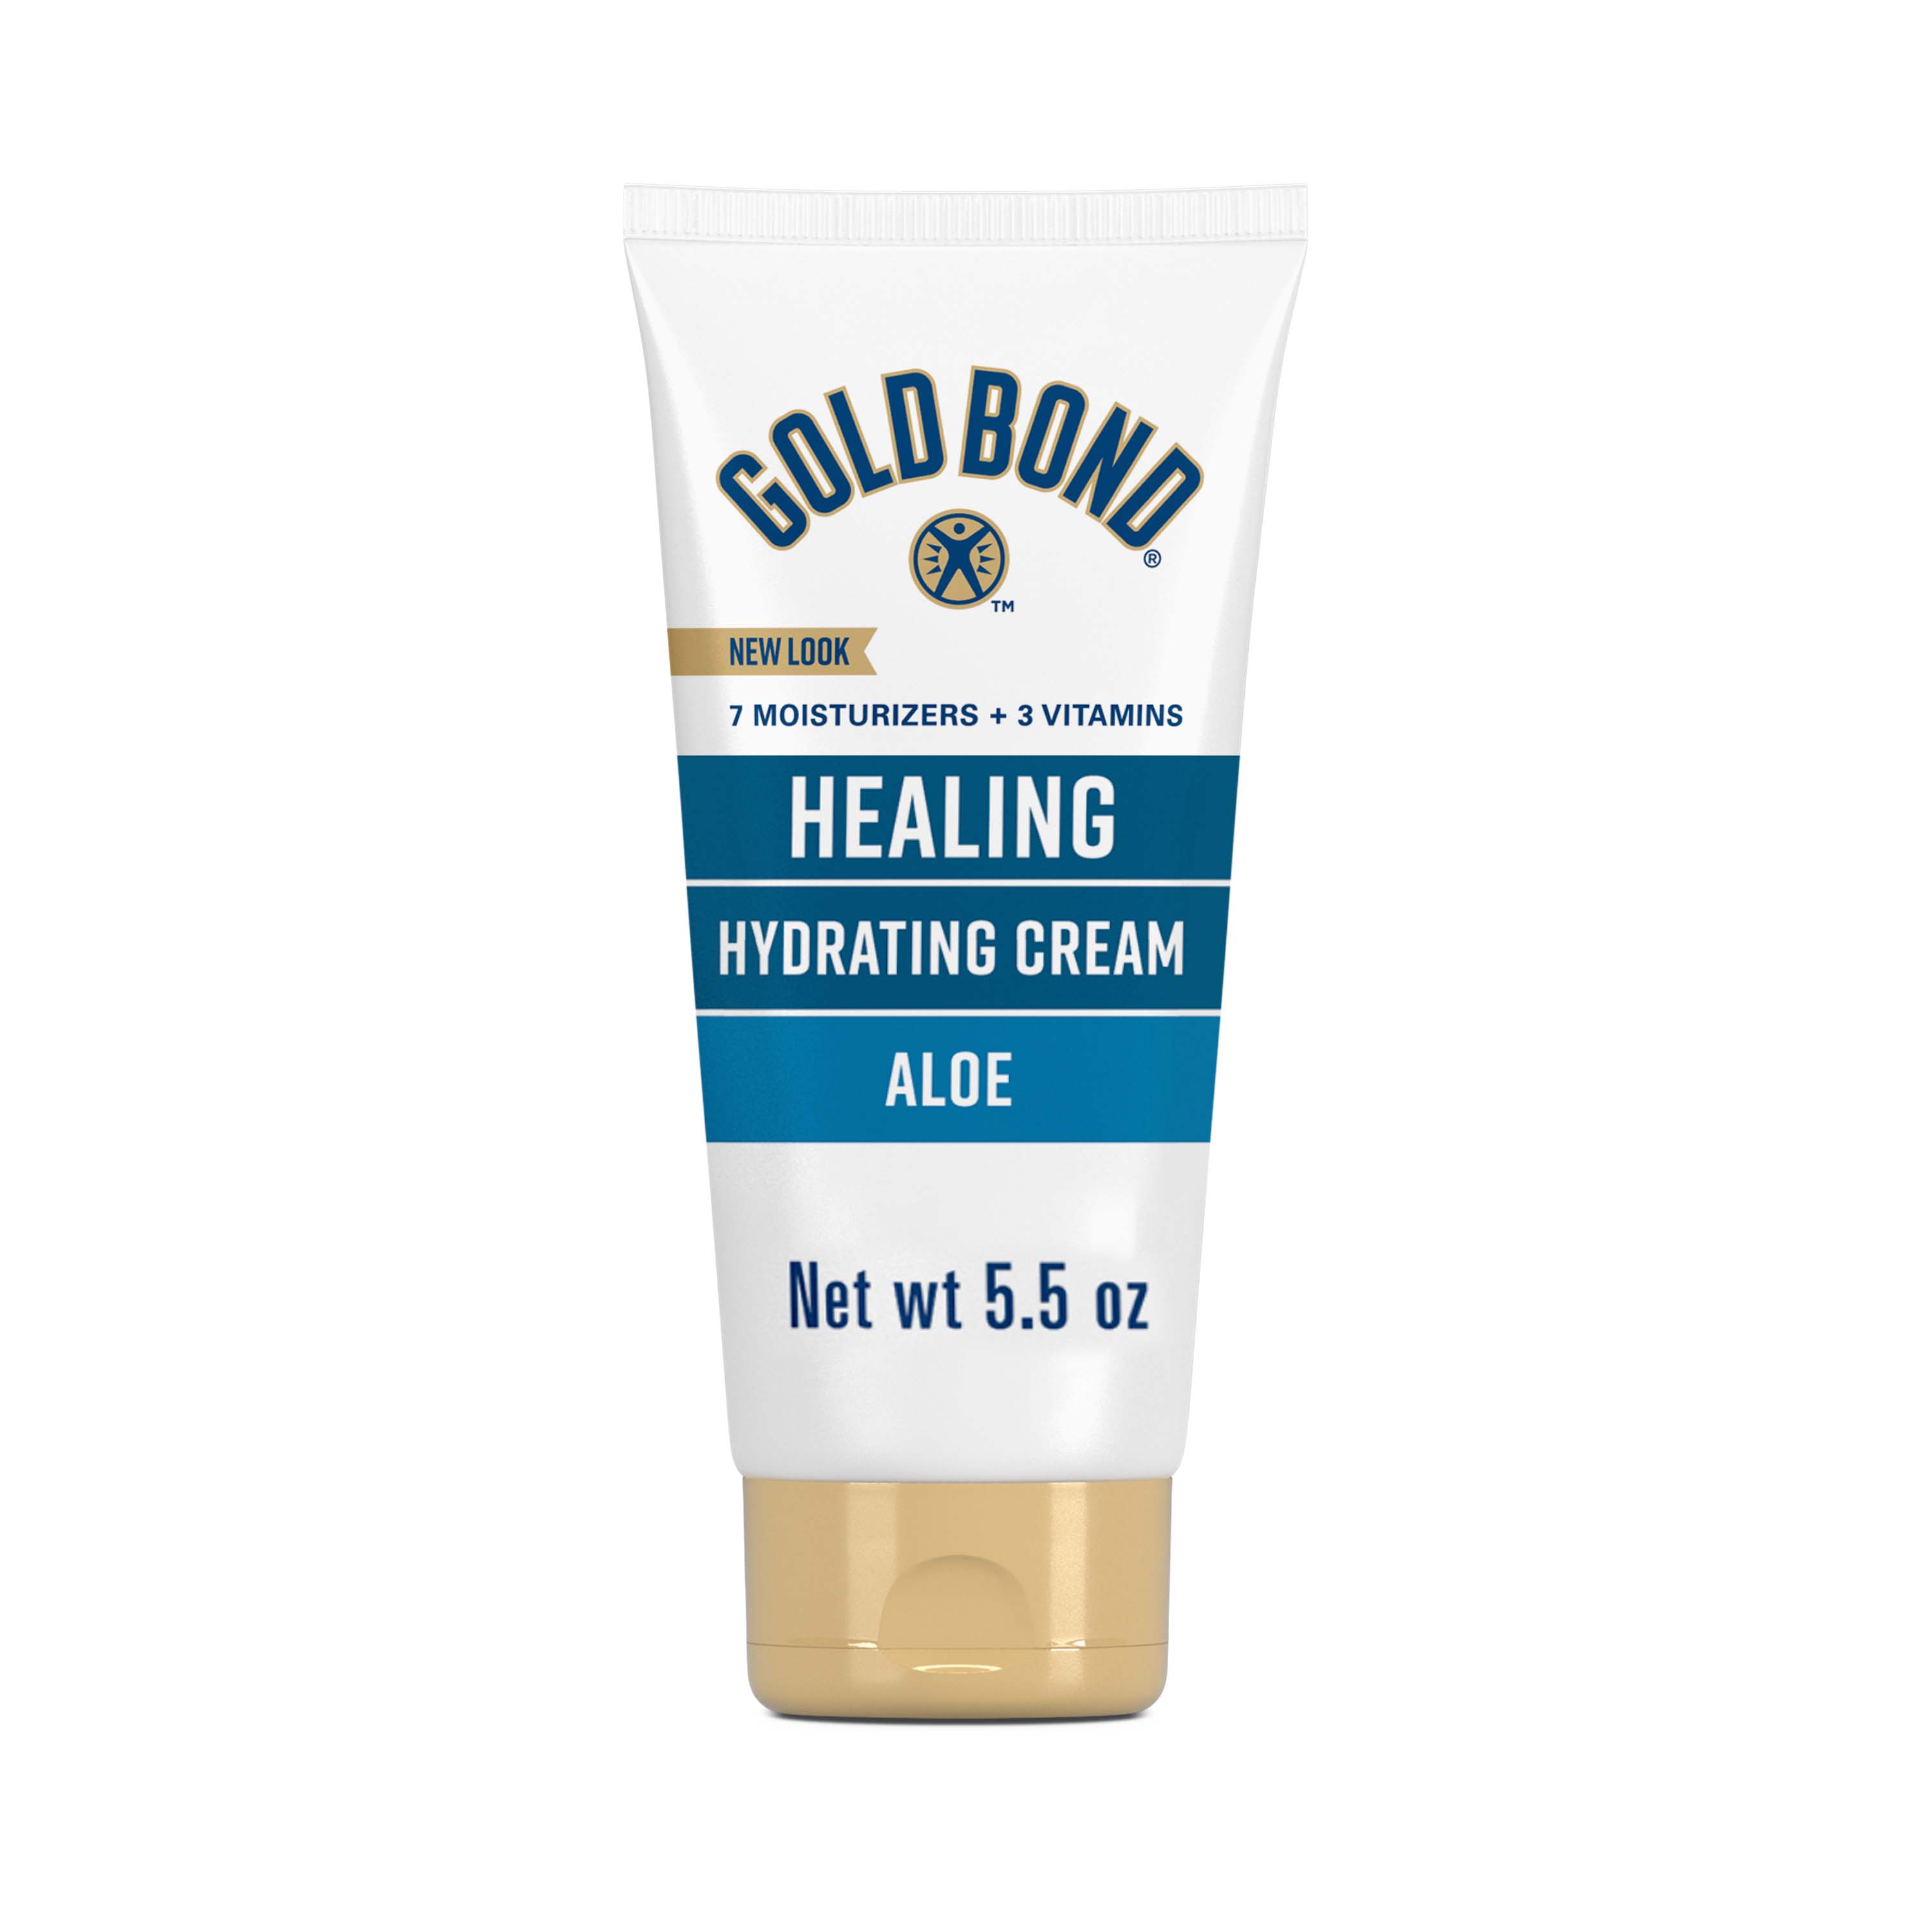 Gold Bond Healing Hydrating Hand and Body Lotion Cream for Dry to Extra Dry Skin, 5.5 oz - image 1 of 9